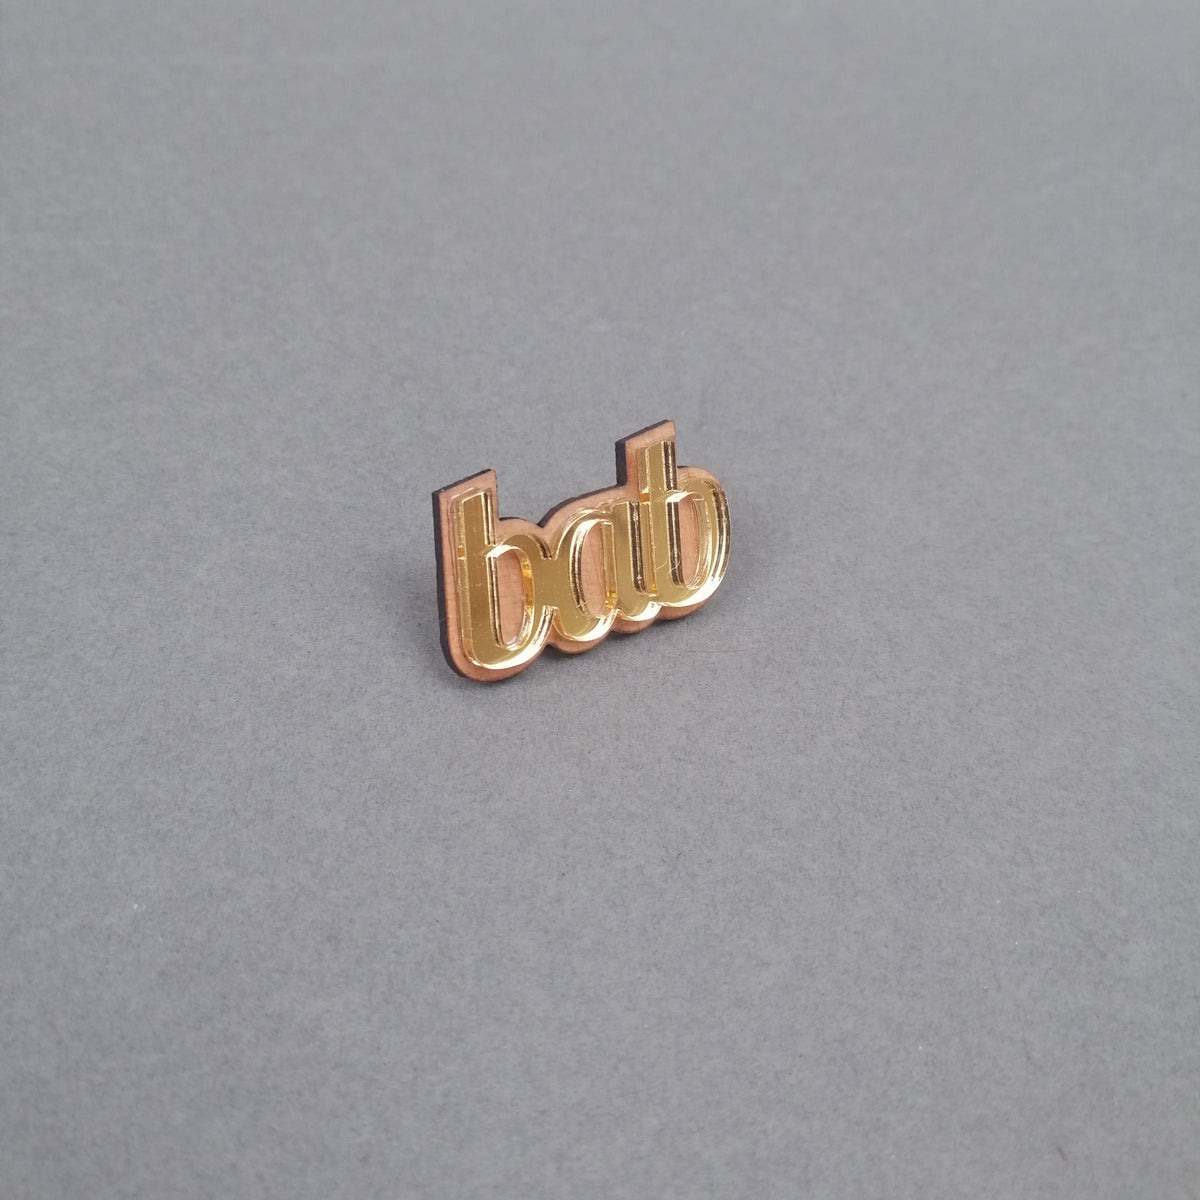 Working Clasp: Gold Bab Brooch